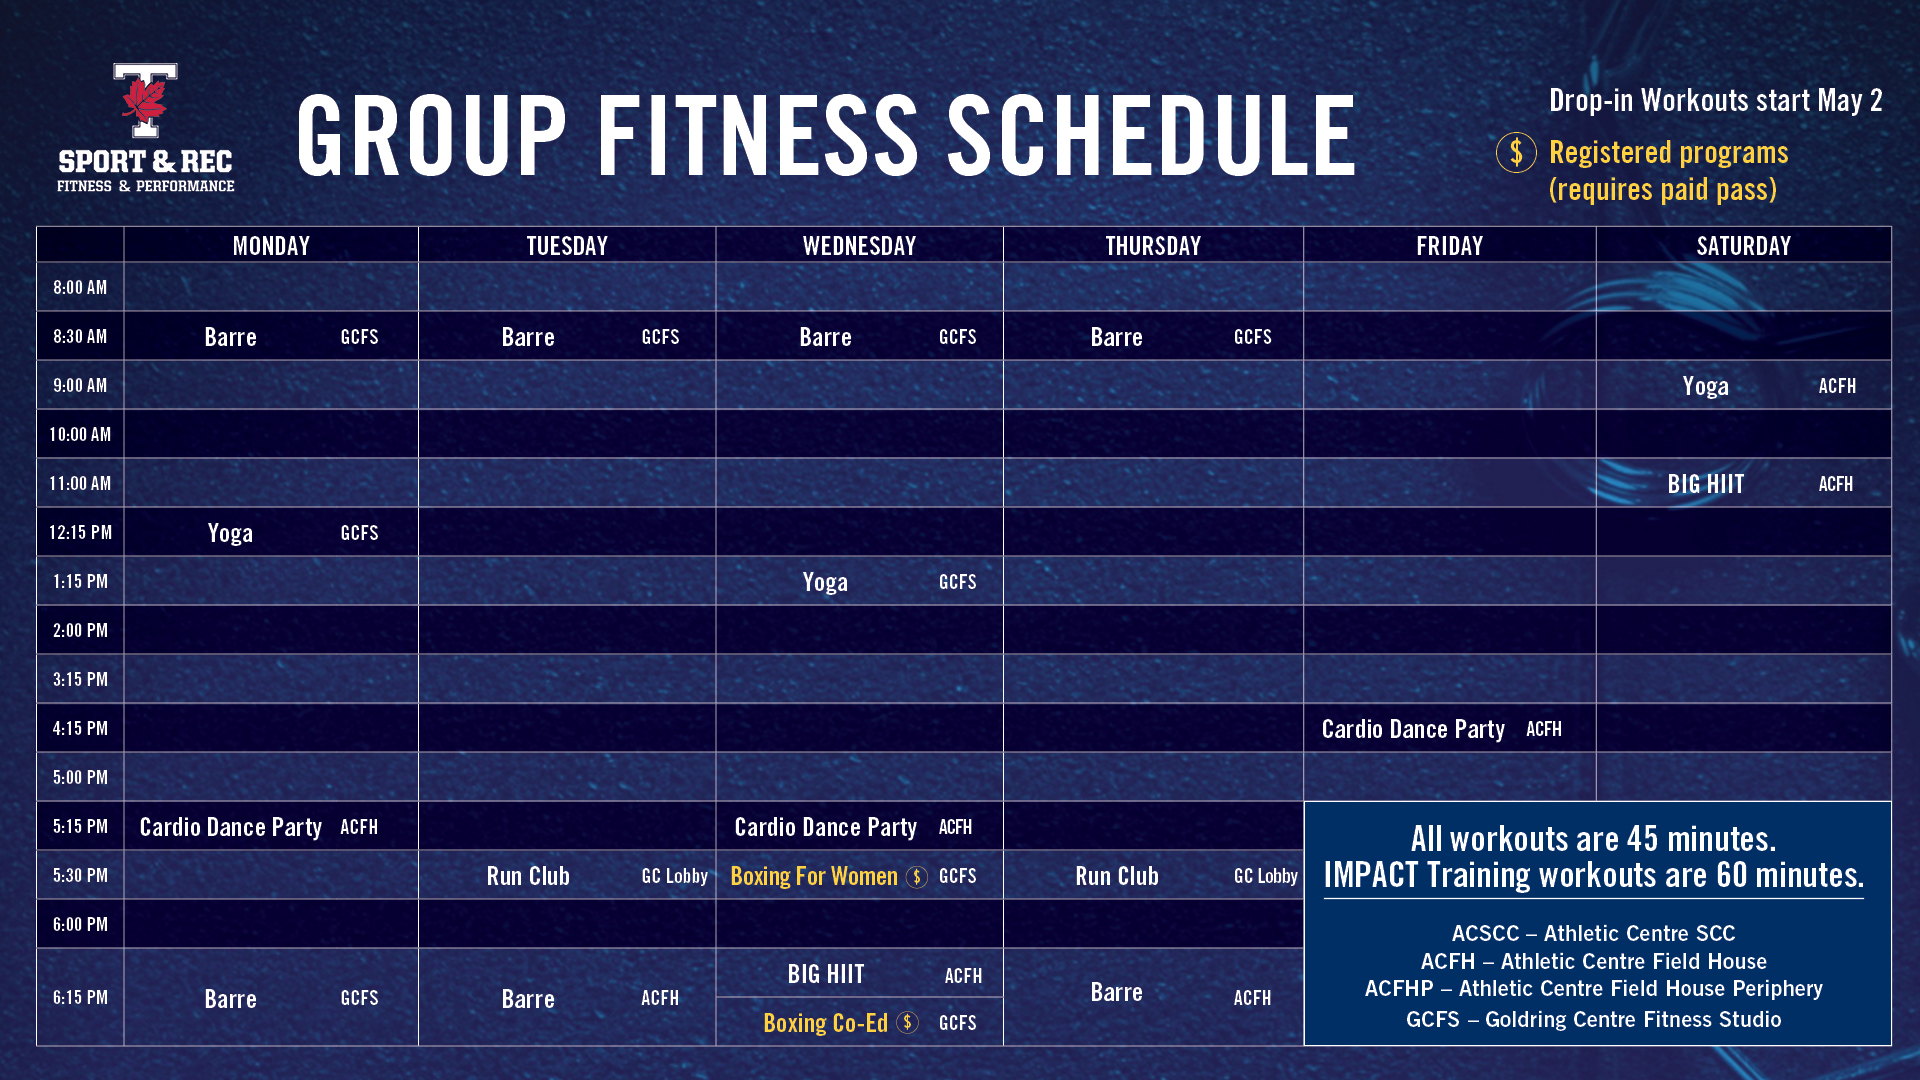 Spring 2022 Group Fitness Schedule